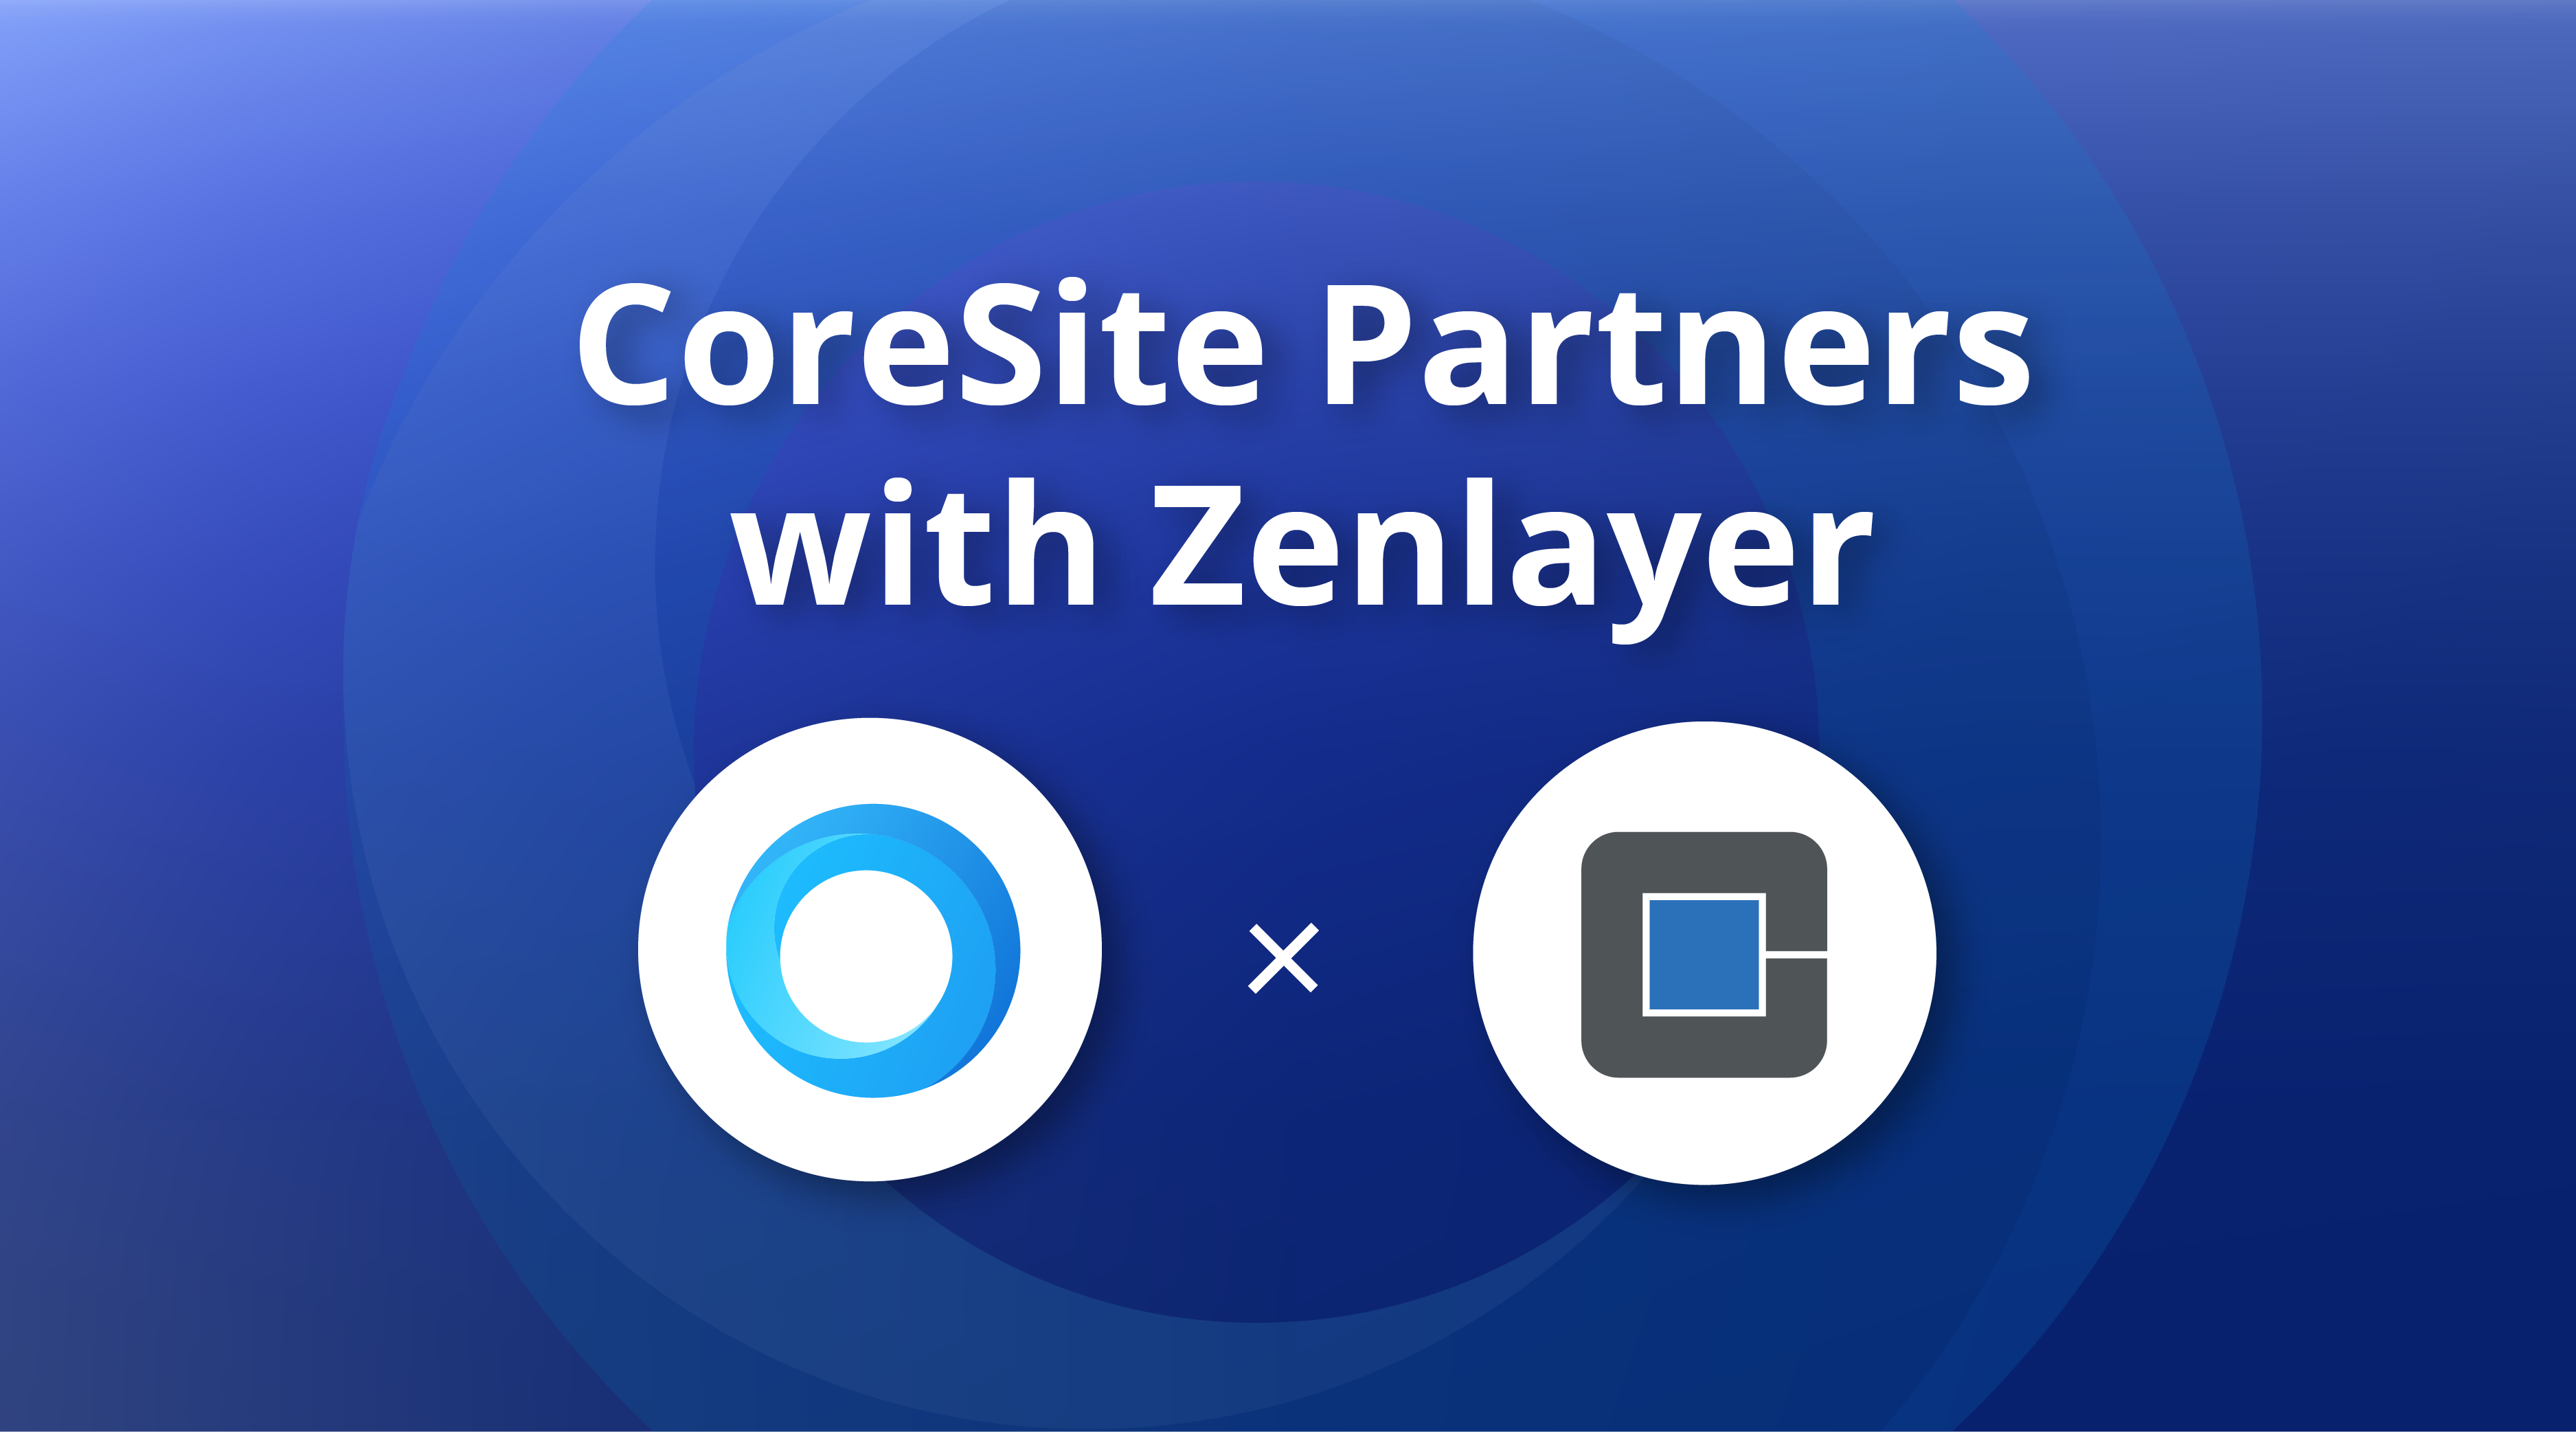 CoreSite Partners with Zenlayer to Empower Enterprises to Reach Global Markets on the Open Cloud Exchange